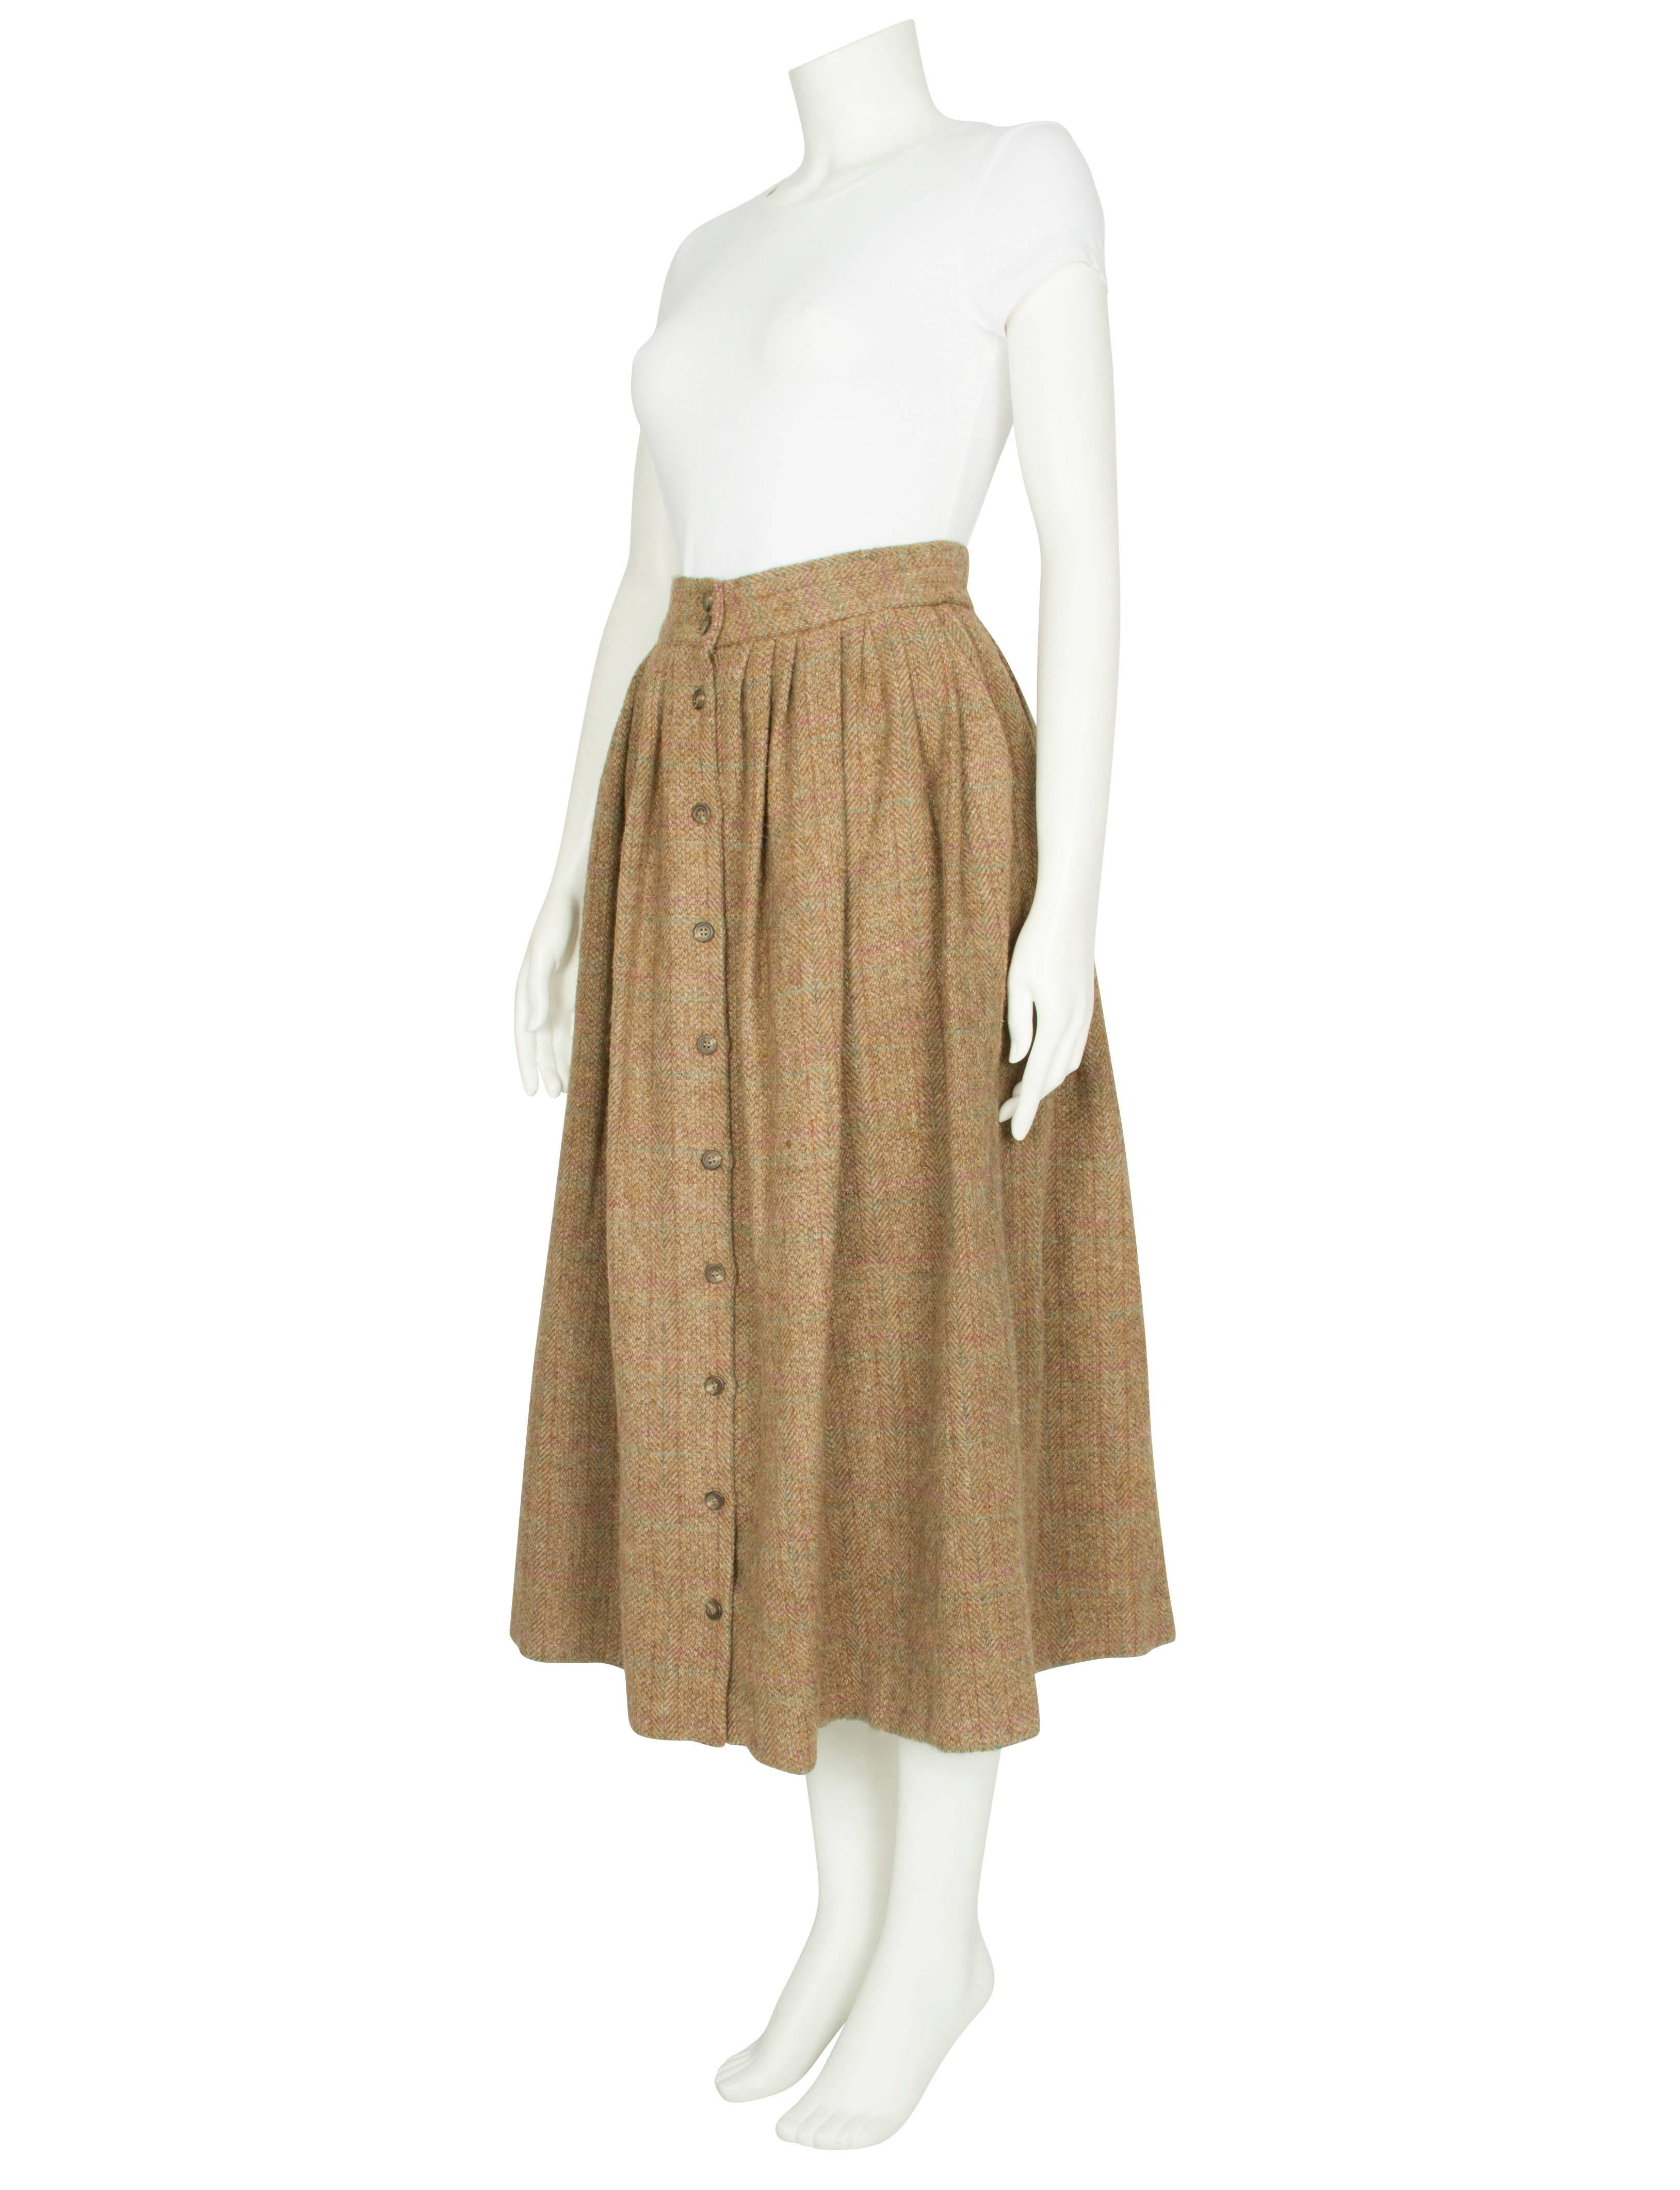 A late 1970s/early 1980s Polo Ralph Lauren pale brown tweed skirt with a faint purple and green check pattern. The heavy, textured full-length skirt features a fitted high waist, a softly pleated flared shape and an ochre silk lining. The skirt